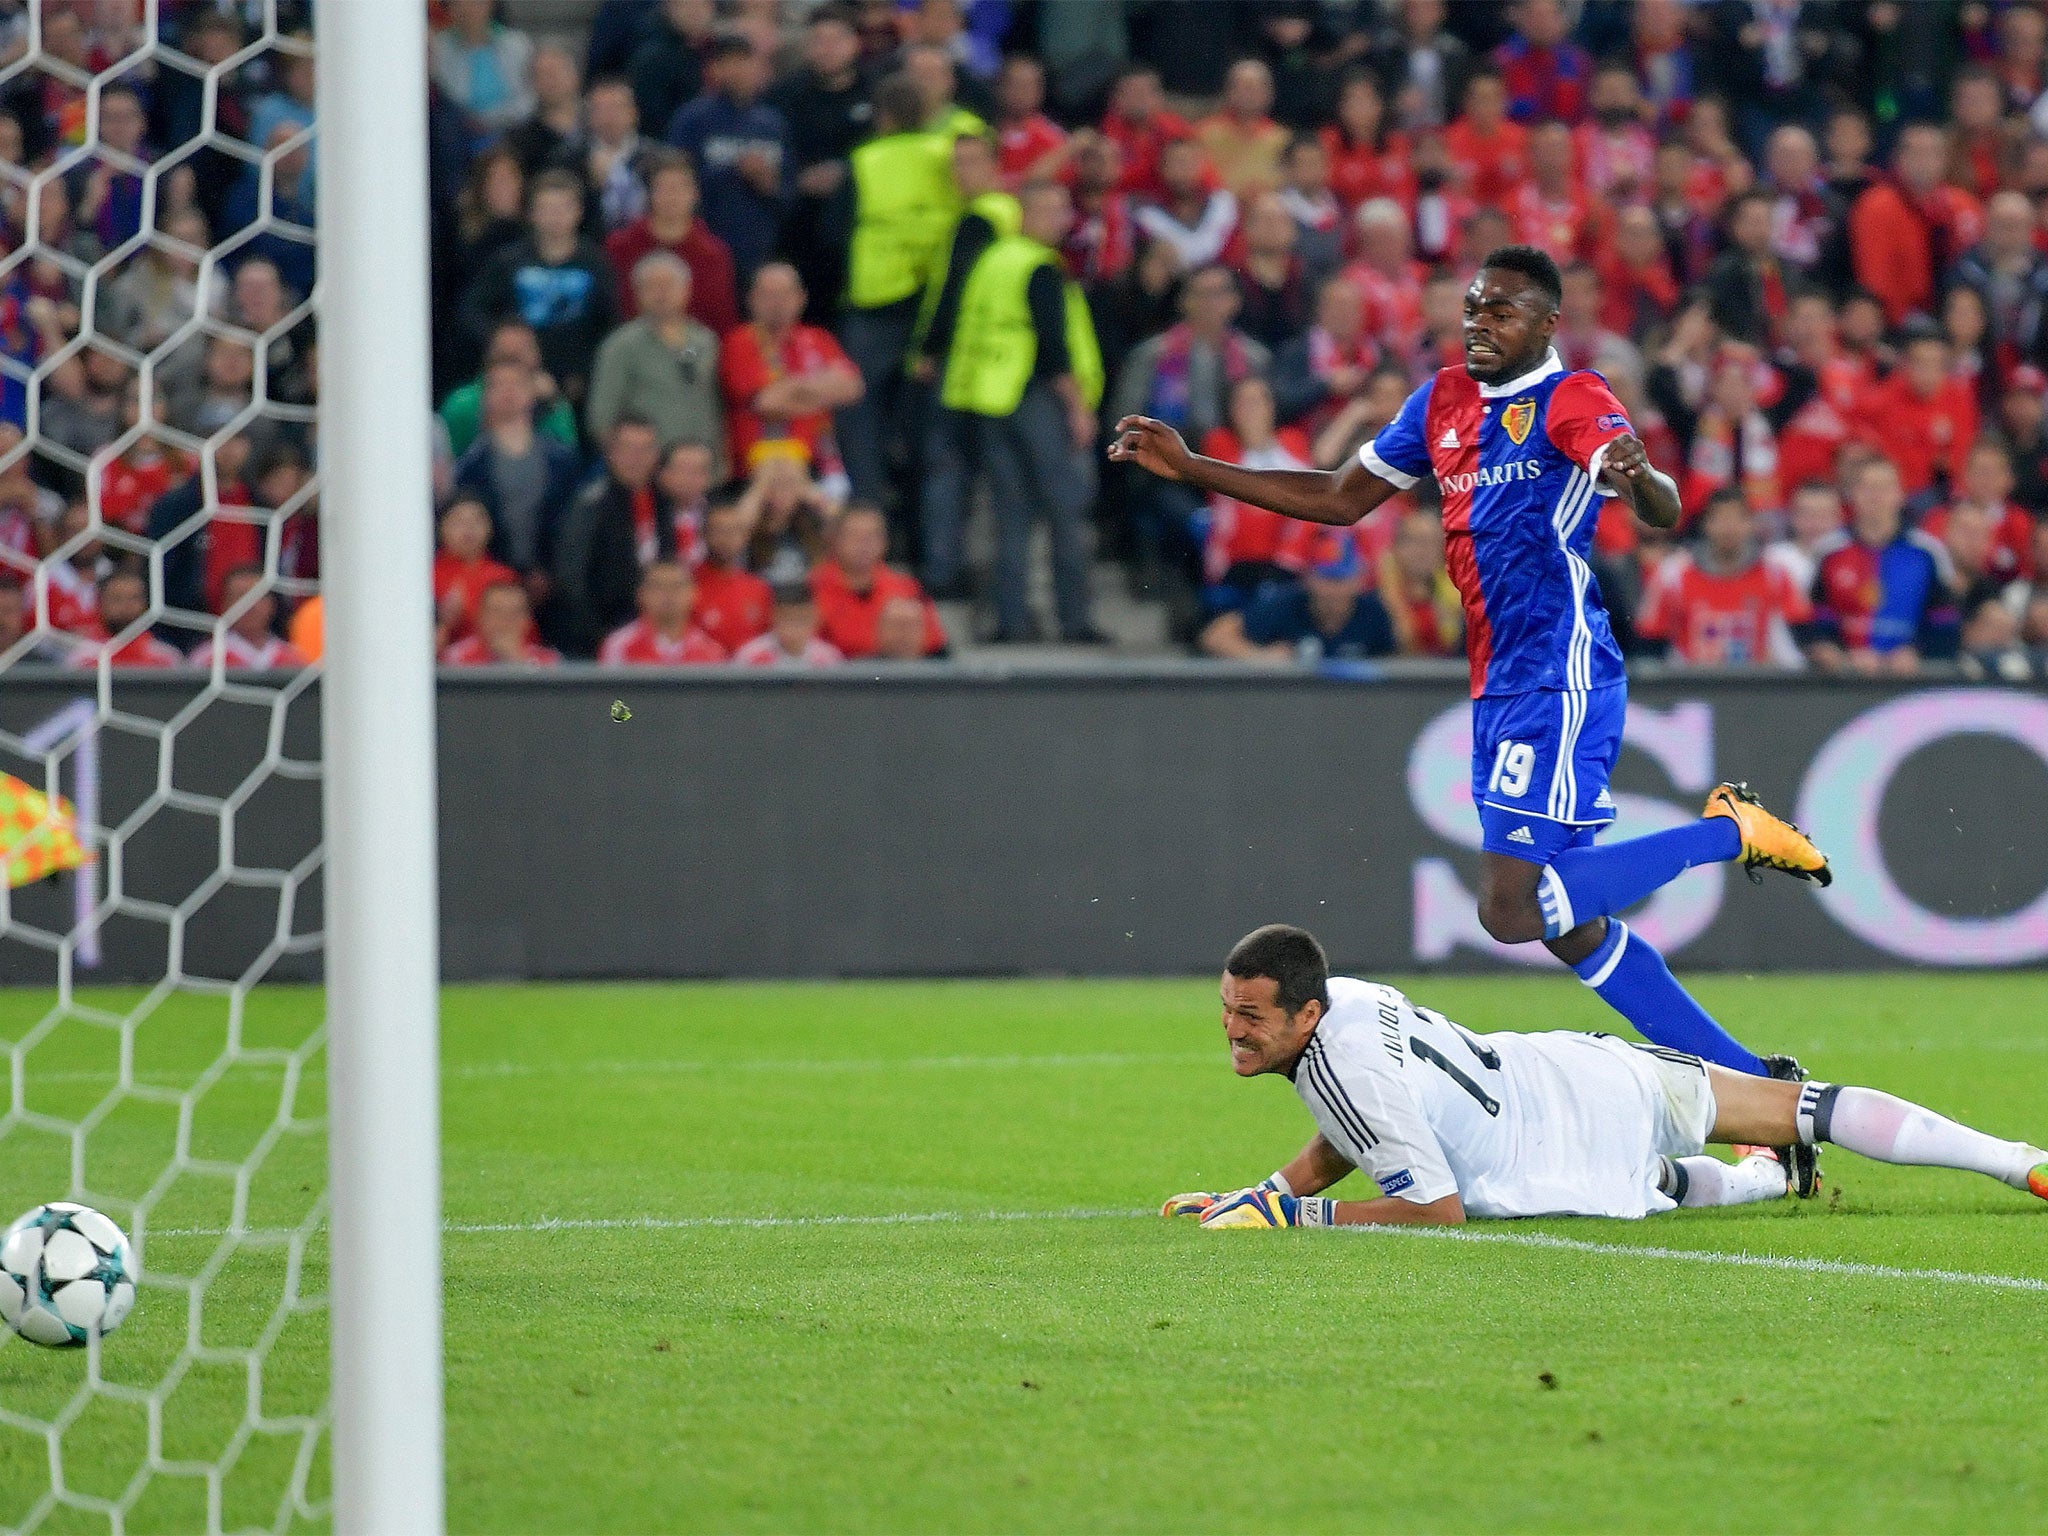 Basel overcame Benfica to qualify for the knockout stages